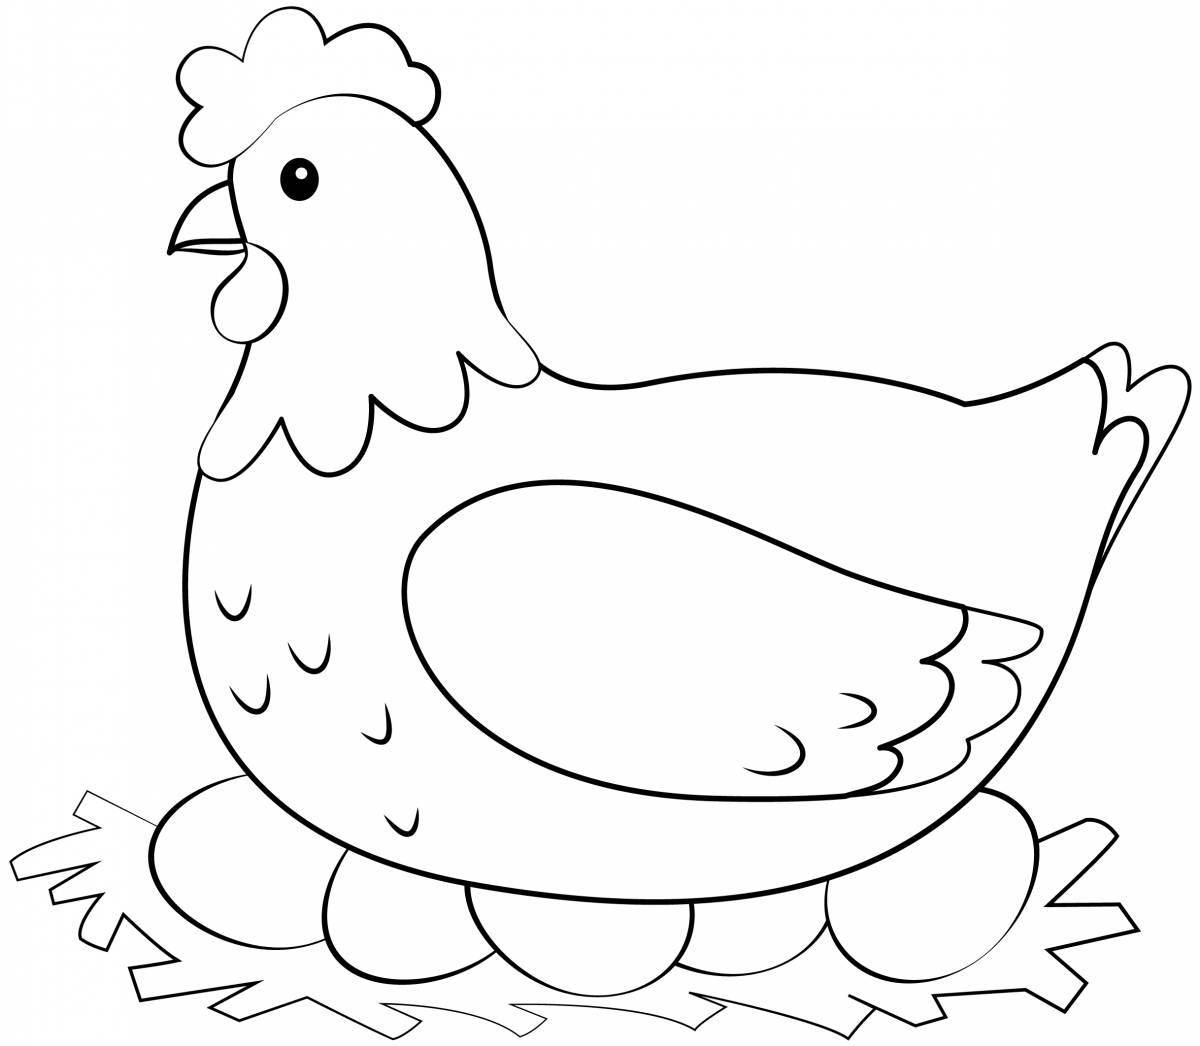 Playful chicken coloring page for kids